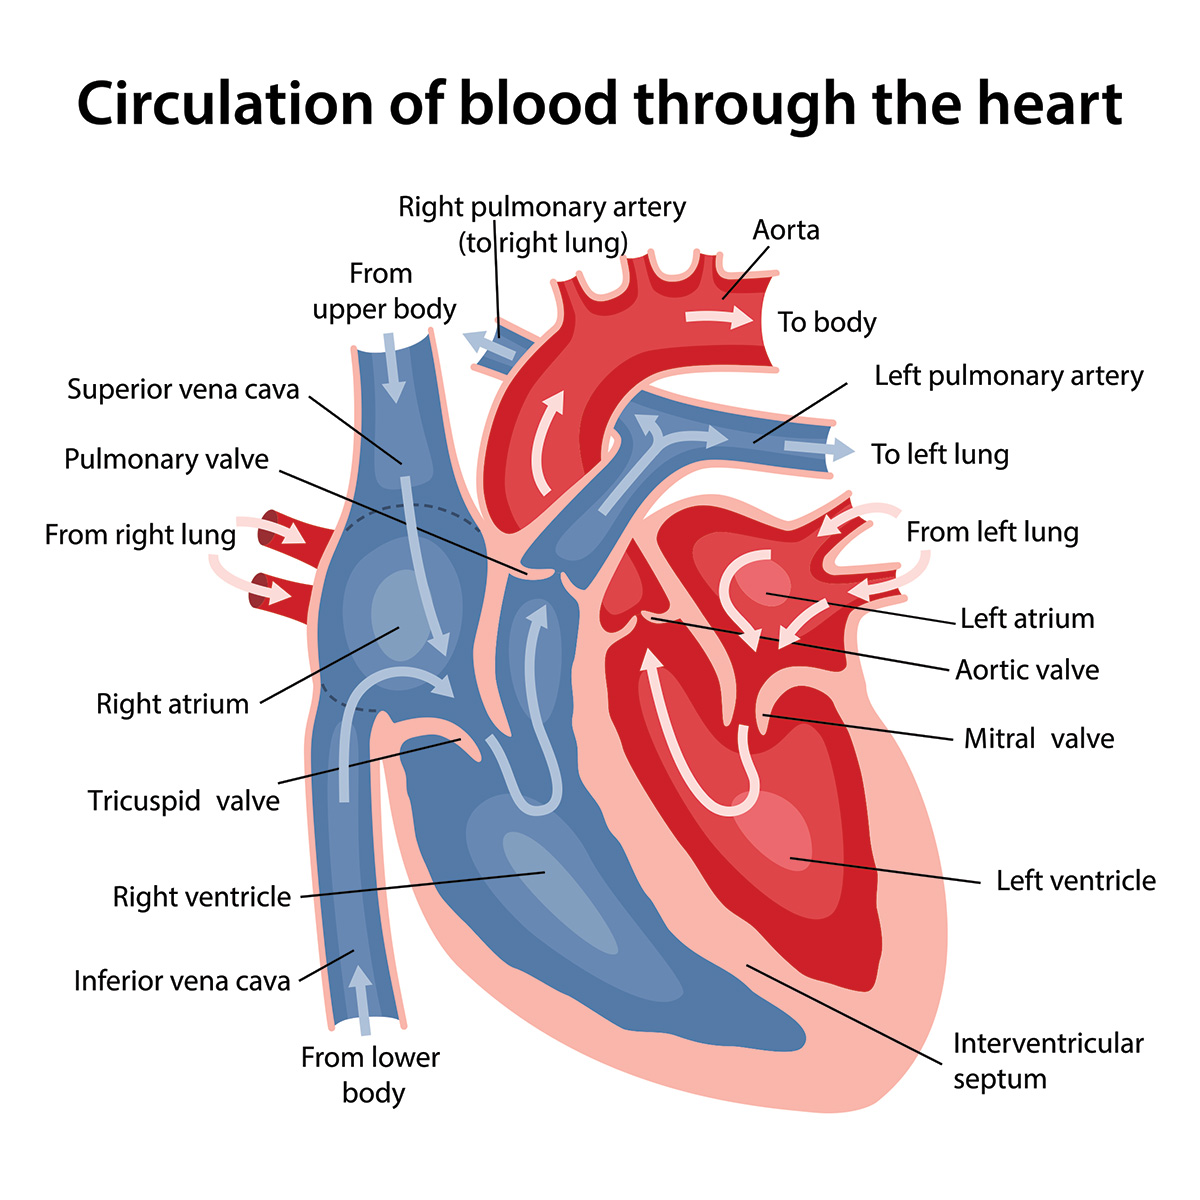 Graphic of circulation through the heart